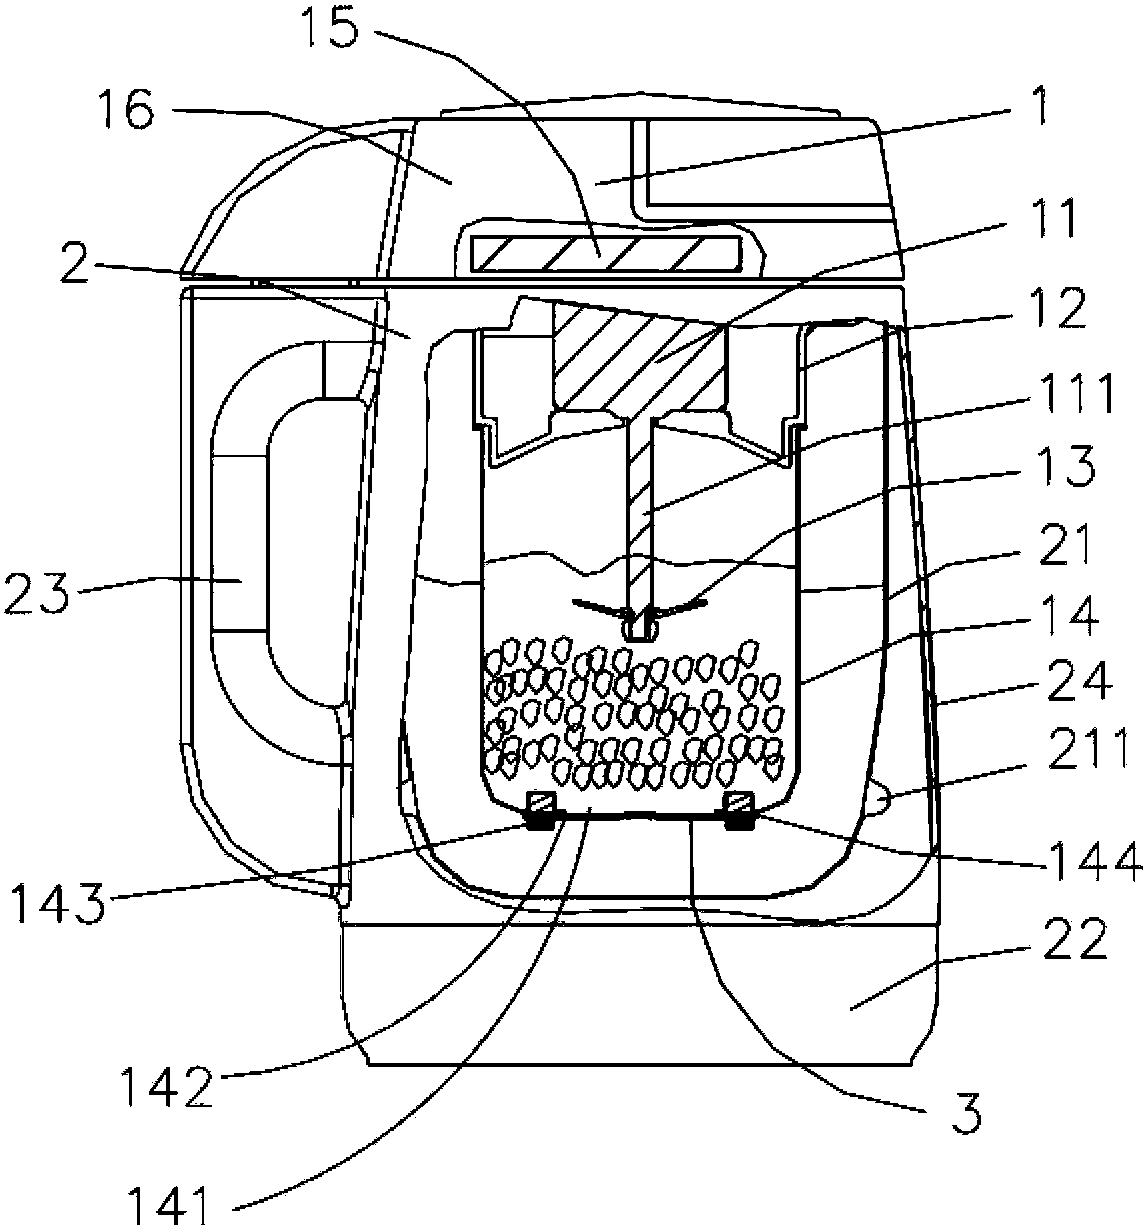 Method for utilizing soybean milk machine with inner smashing cup to make soybean milk